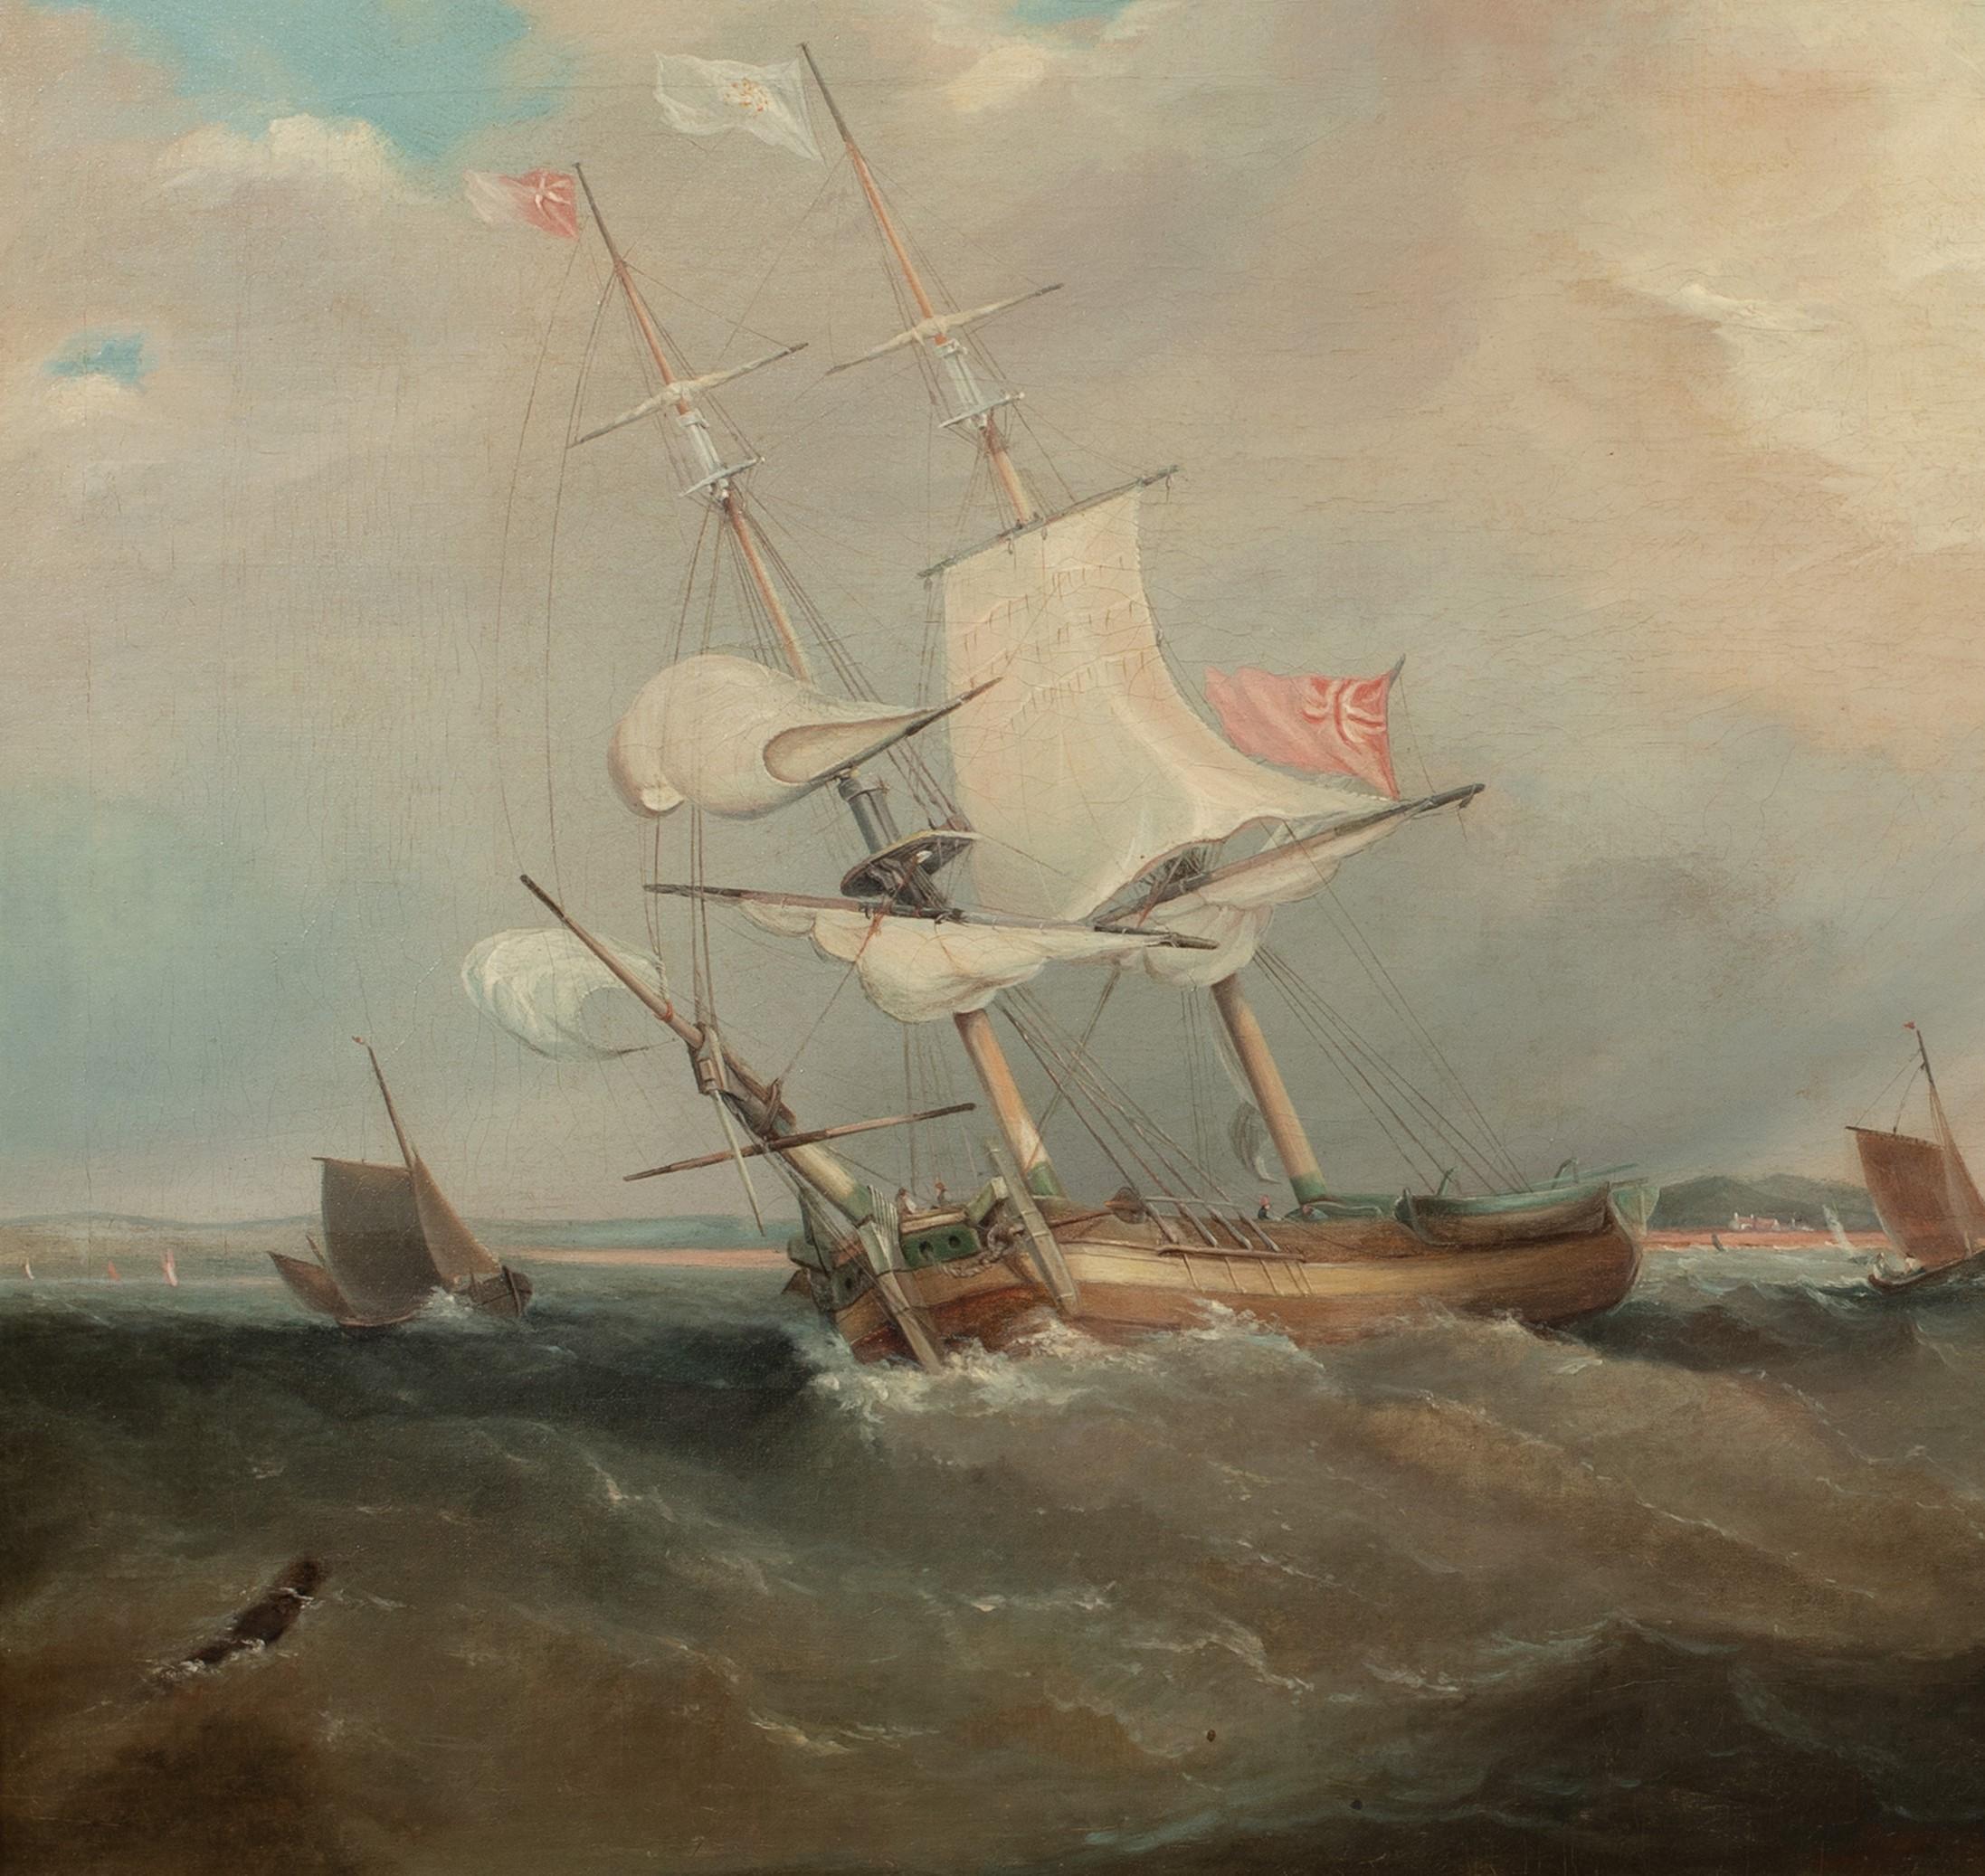 British Royal Navy Frigate In Choppy Waters, 19th Century  - Painting by Unknown